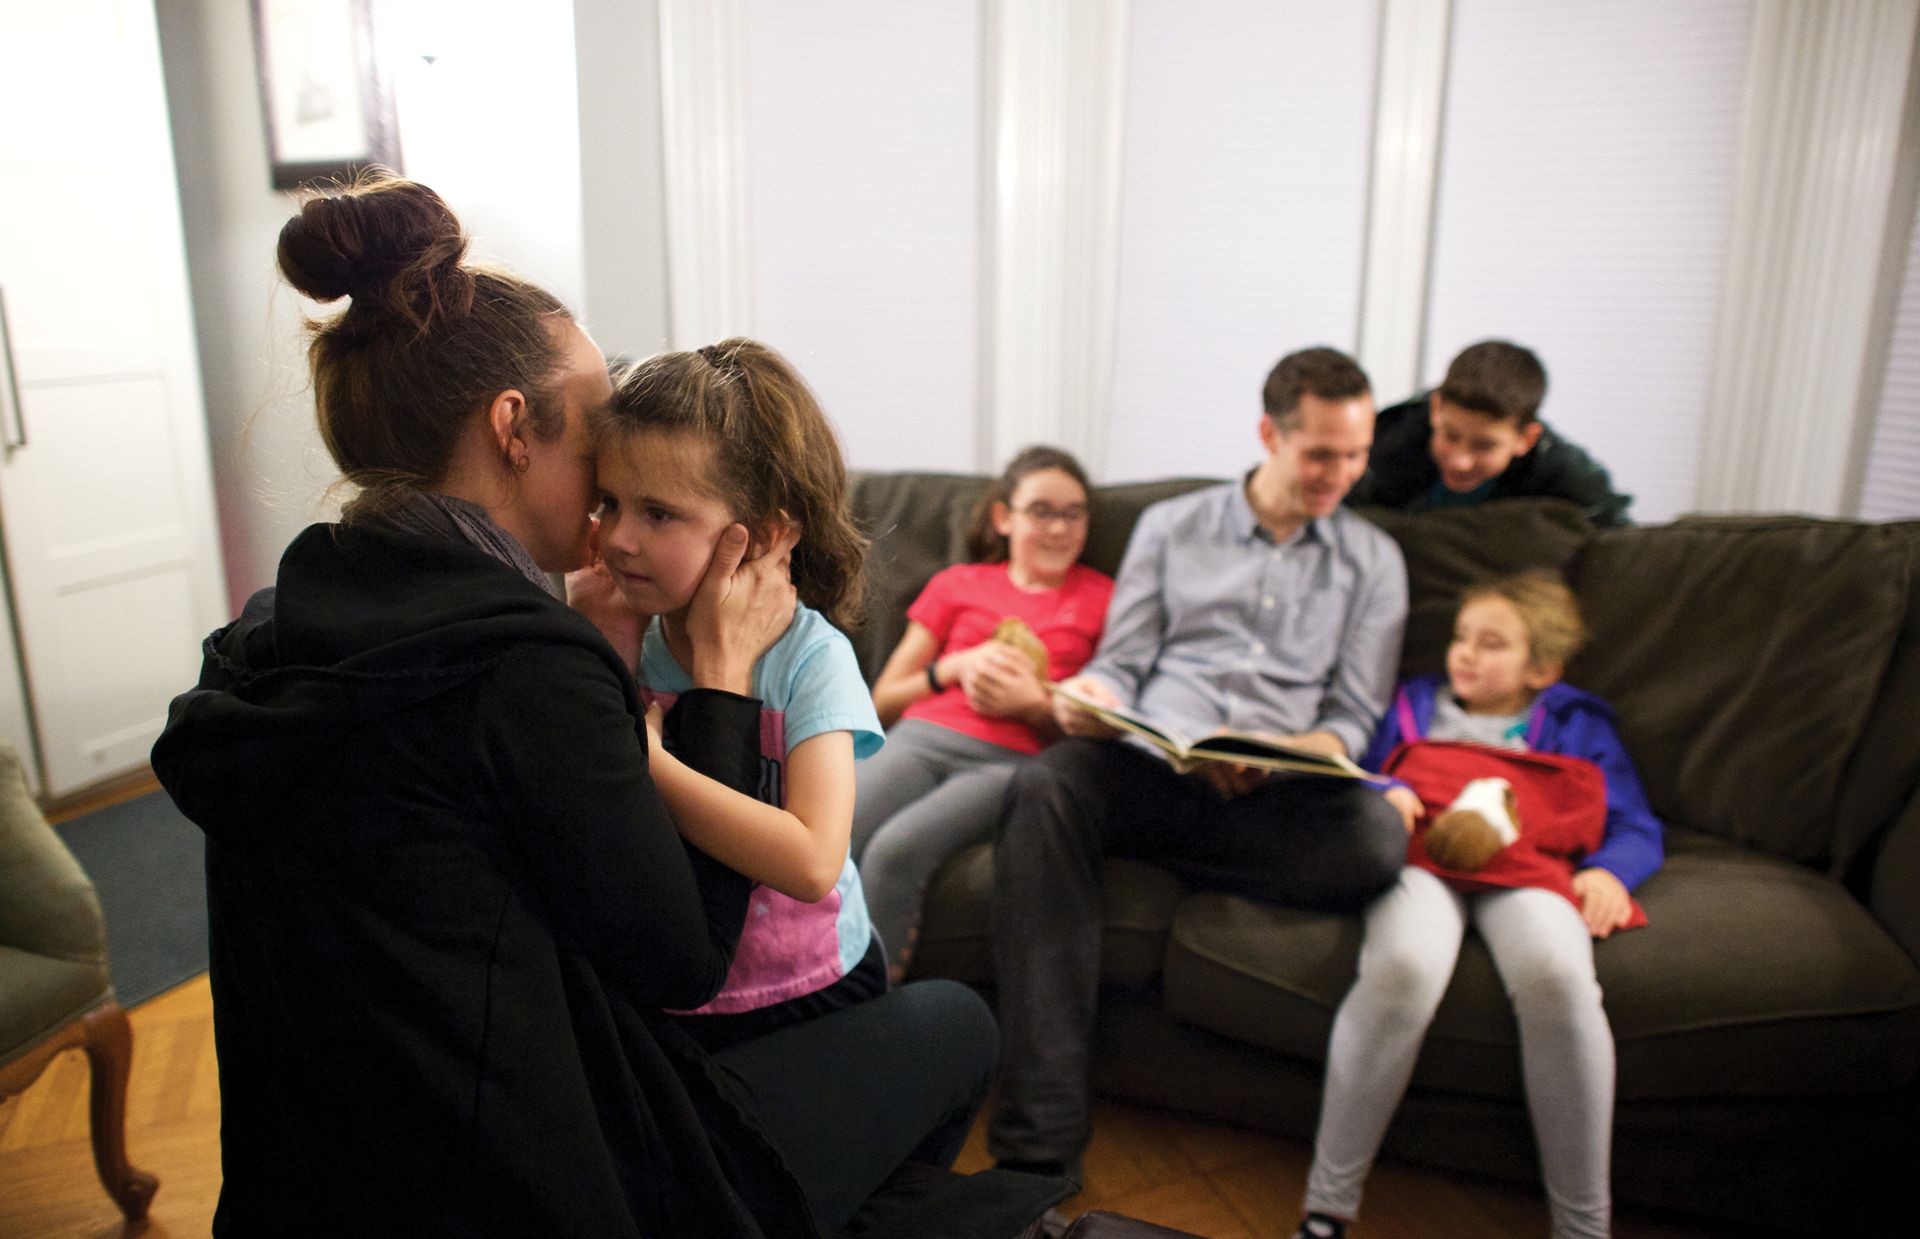 “There’s not a lot of faith here in Harvard [University] land,” says Bishop Rinne, but he and his wife, Tiffany, make time to instill faith in their children.